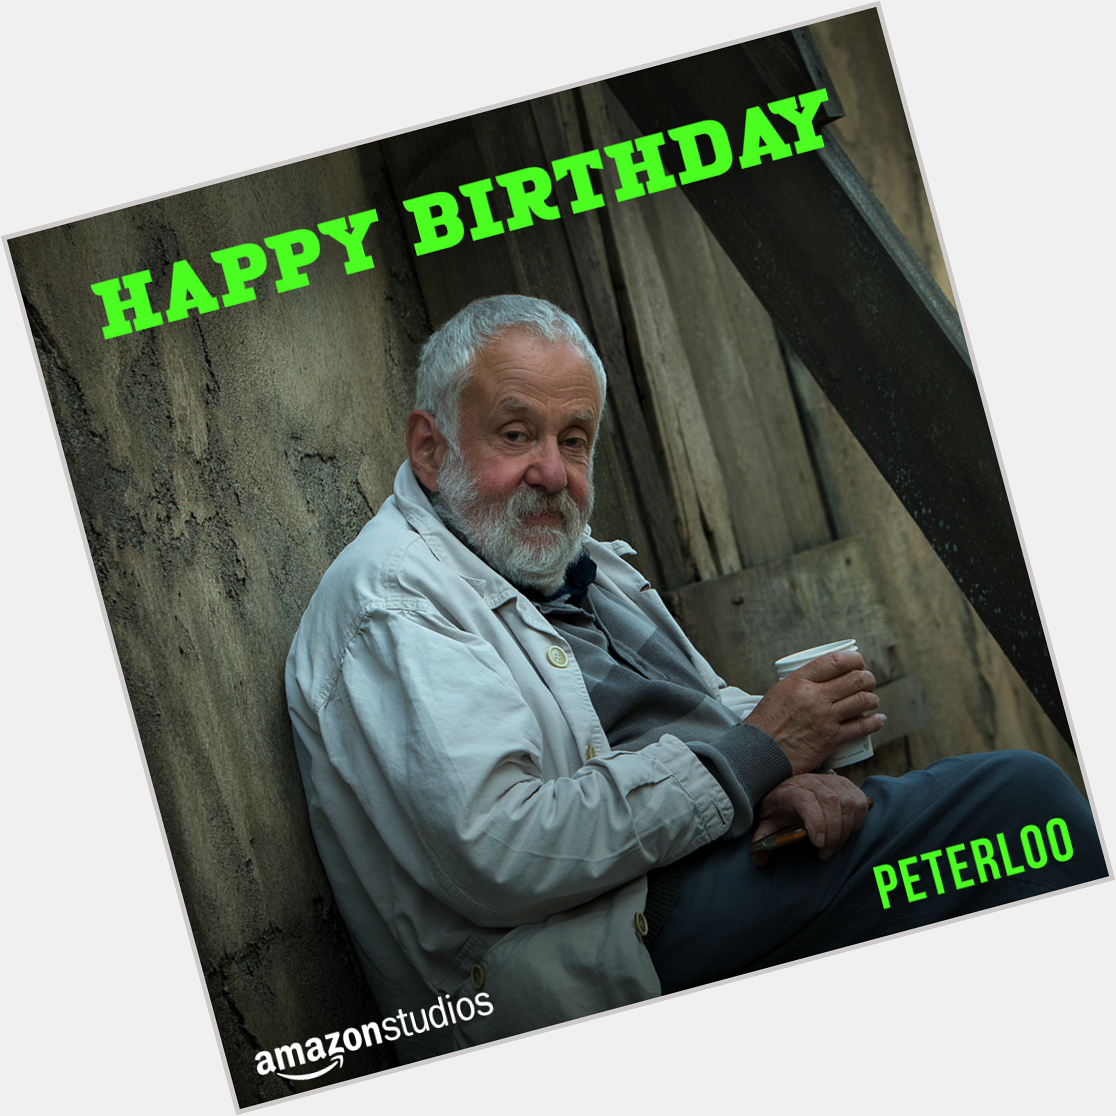 Wishing a very happy birthday to Mike Leigh, the acclaimed director of 